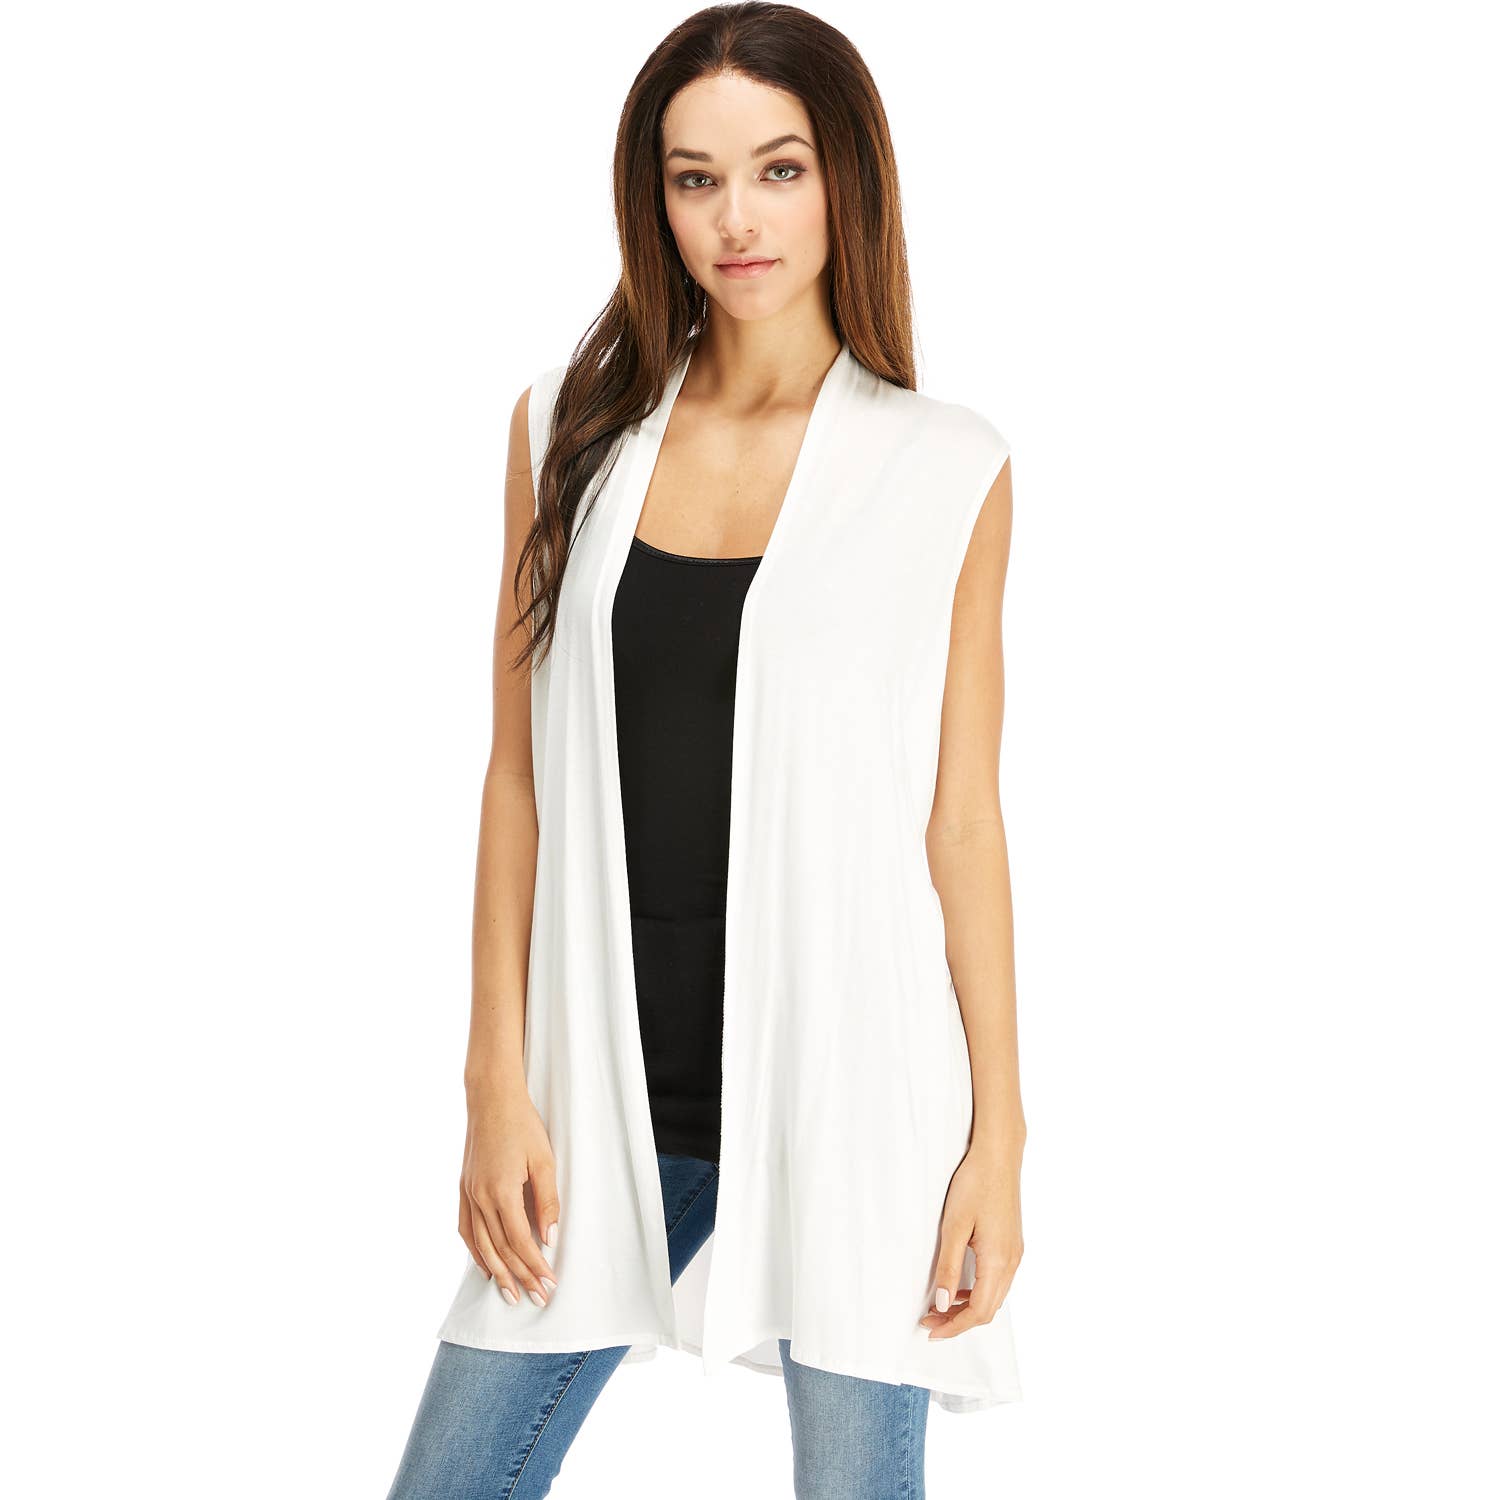 AJK-3010RS Womens Long Sleeveless Vests with Side Pockets | Made in USA | Azules Wholesale